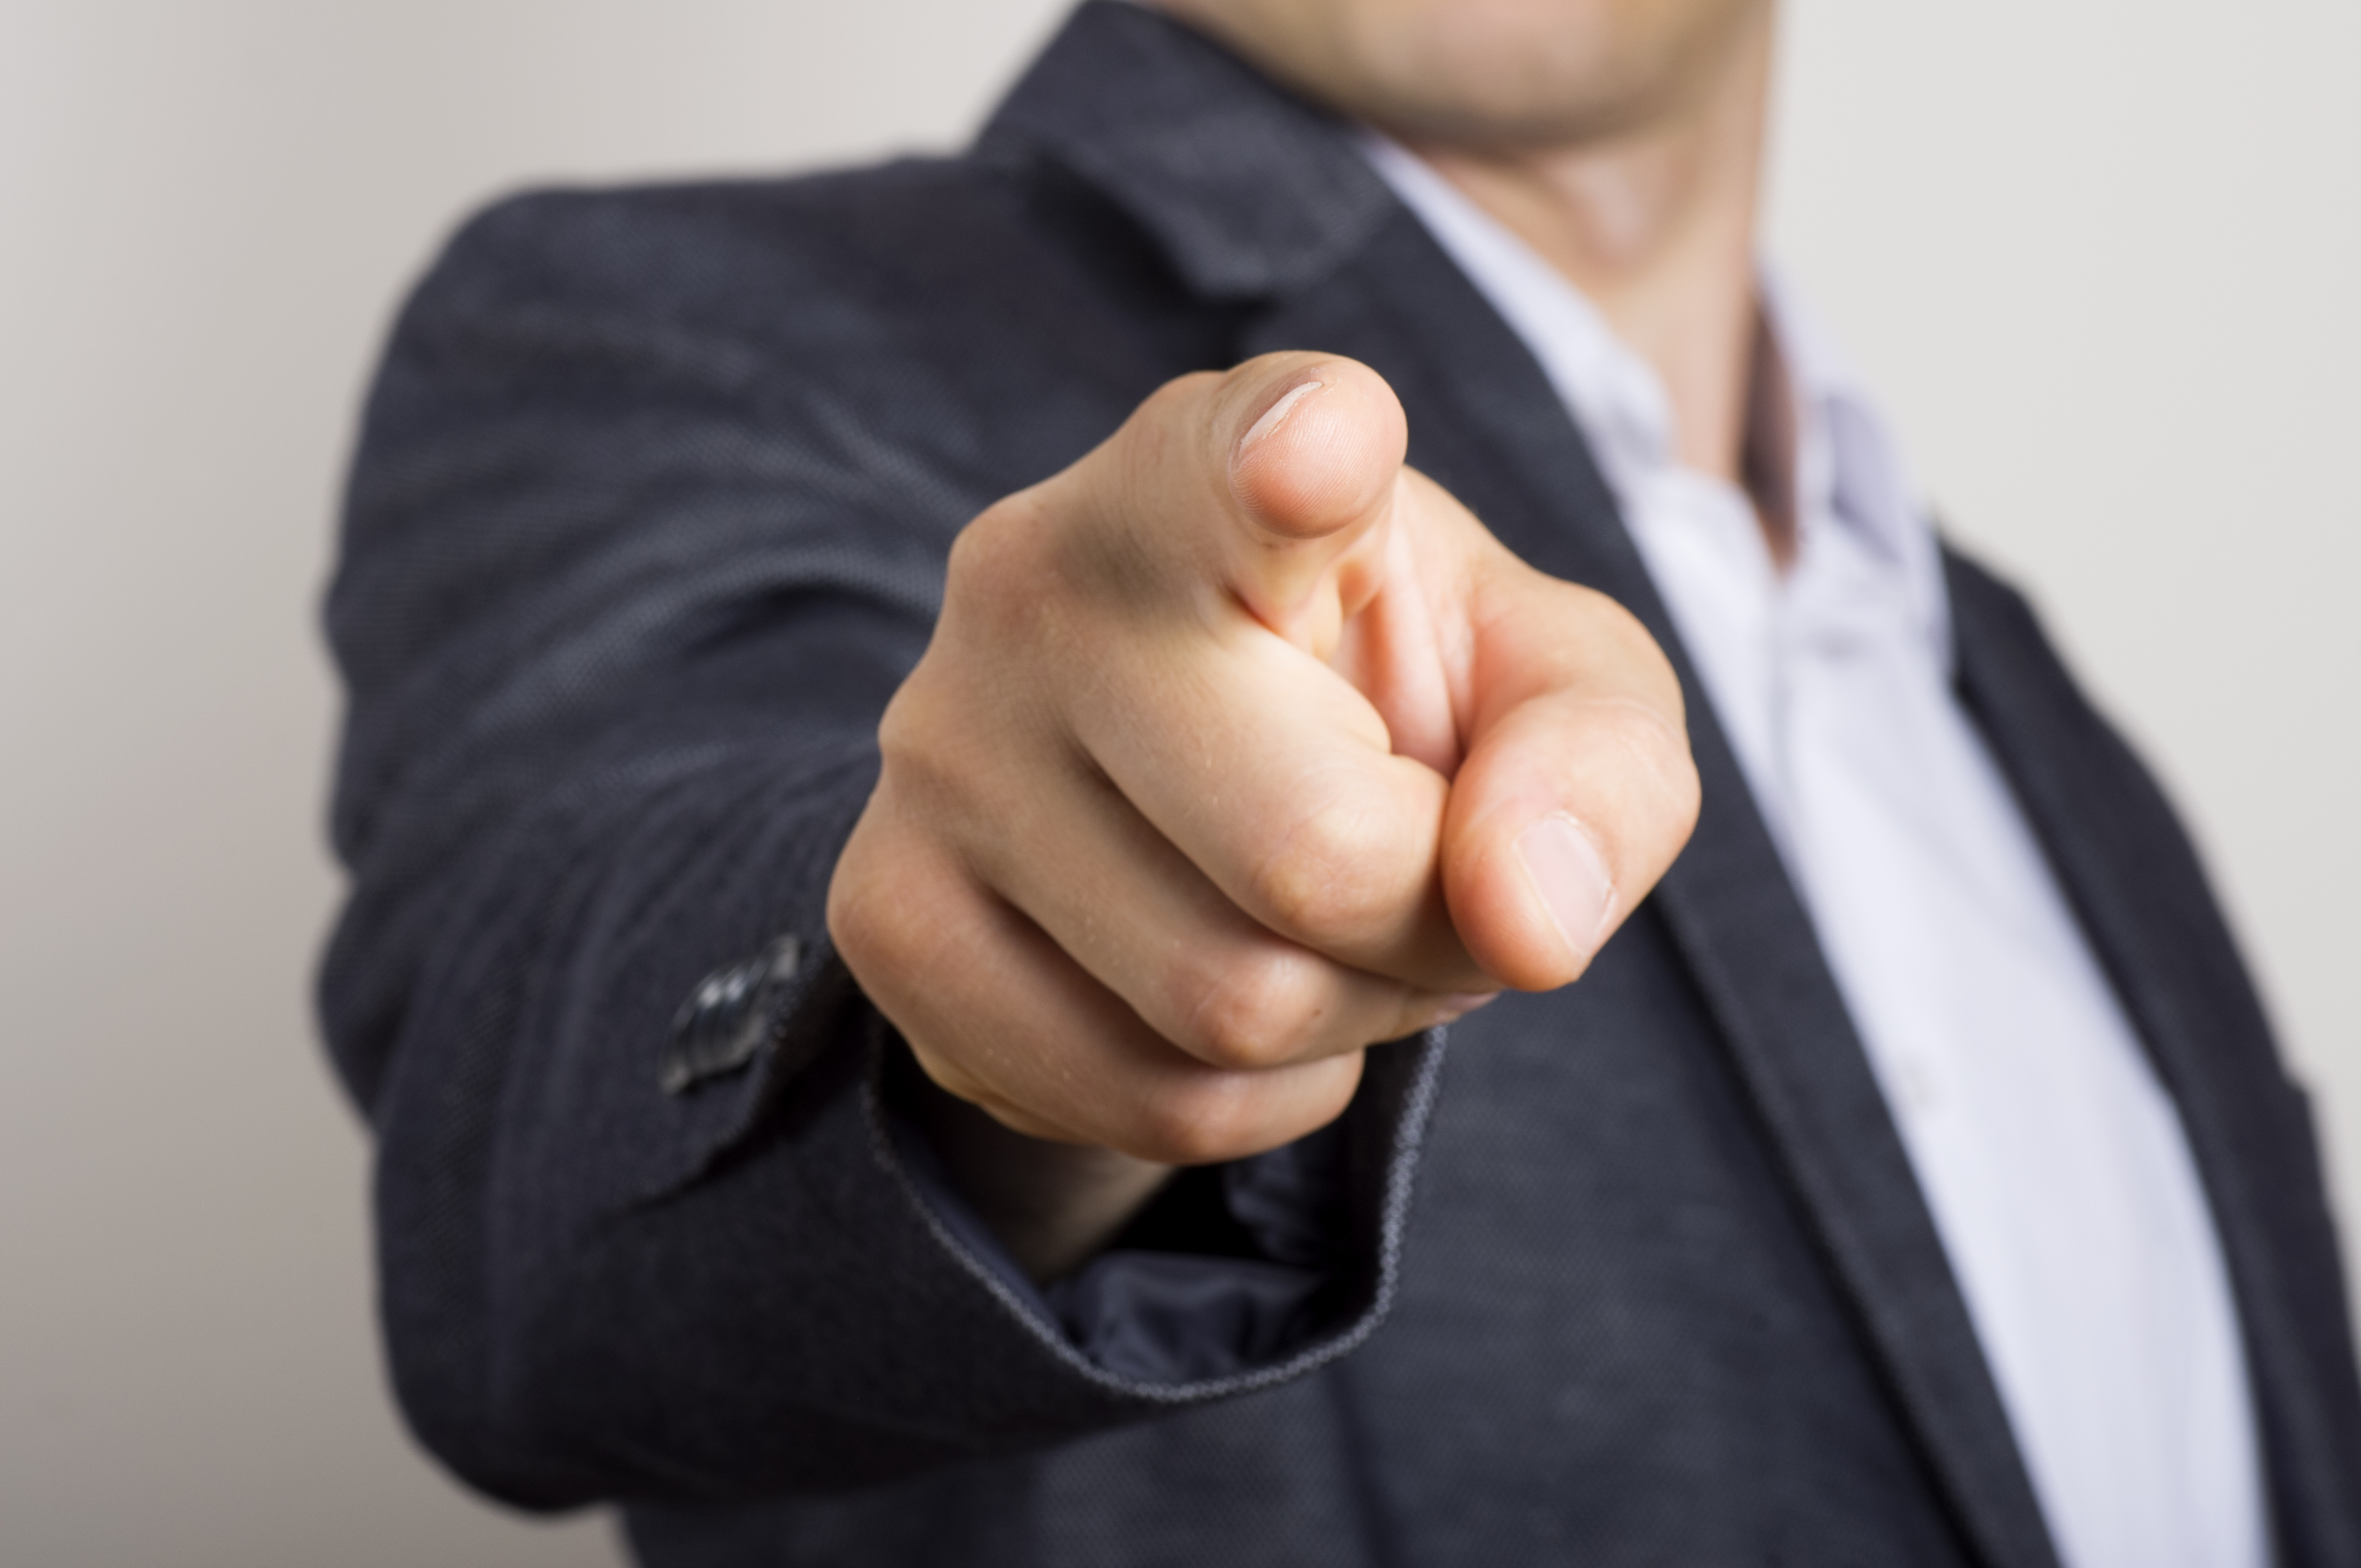 Business man points his finger at someone. | Source: Shutterstock